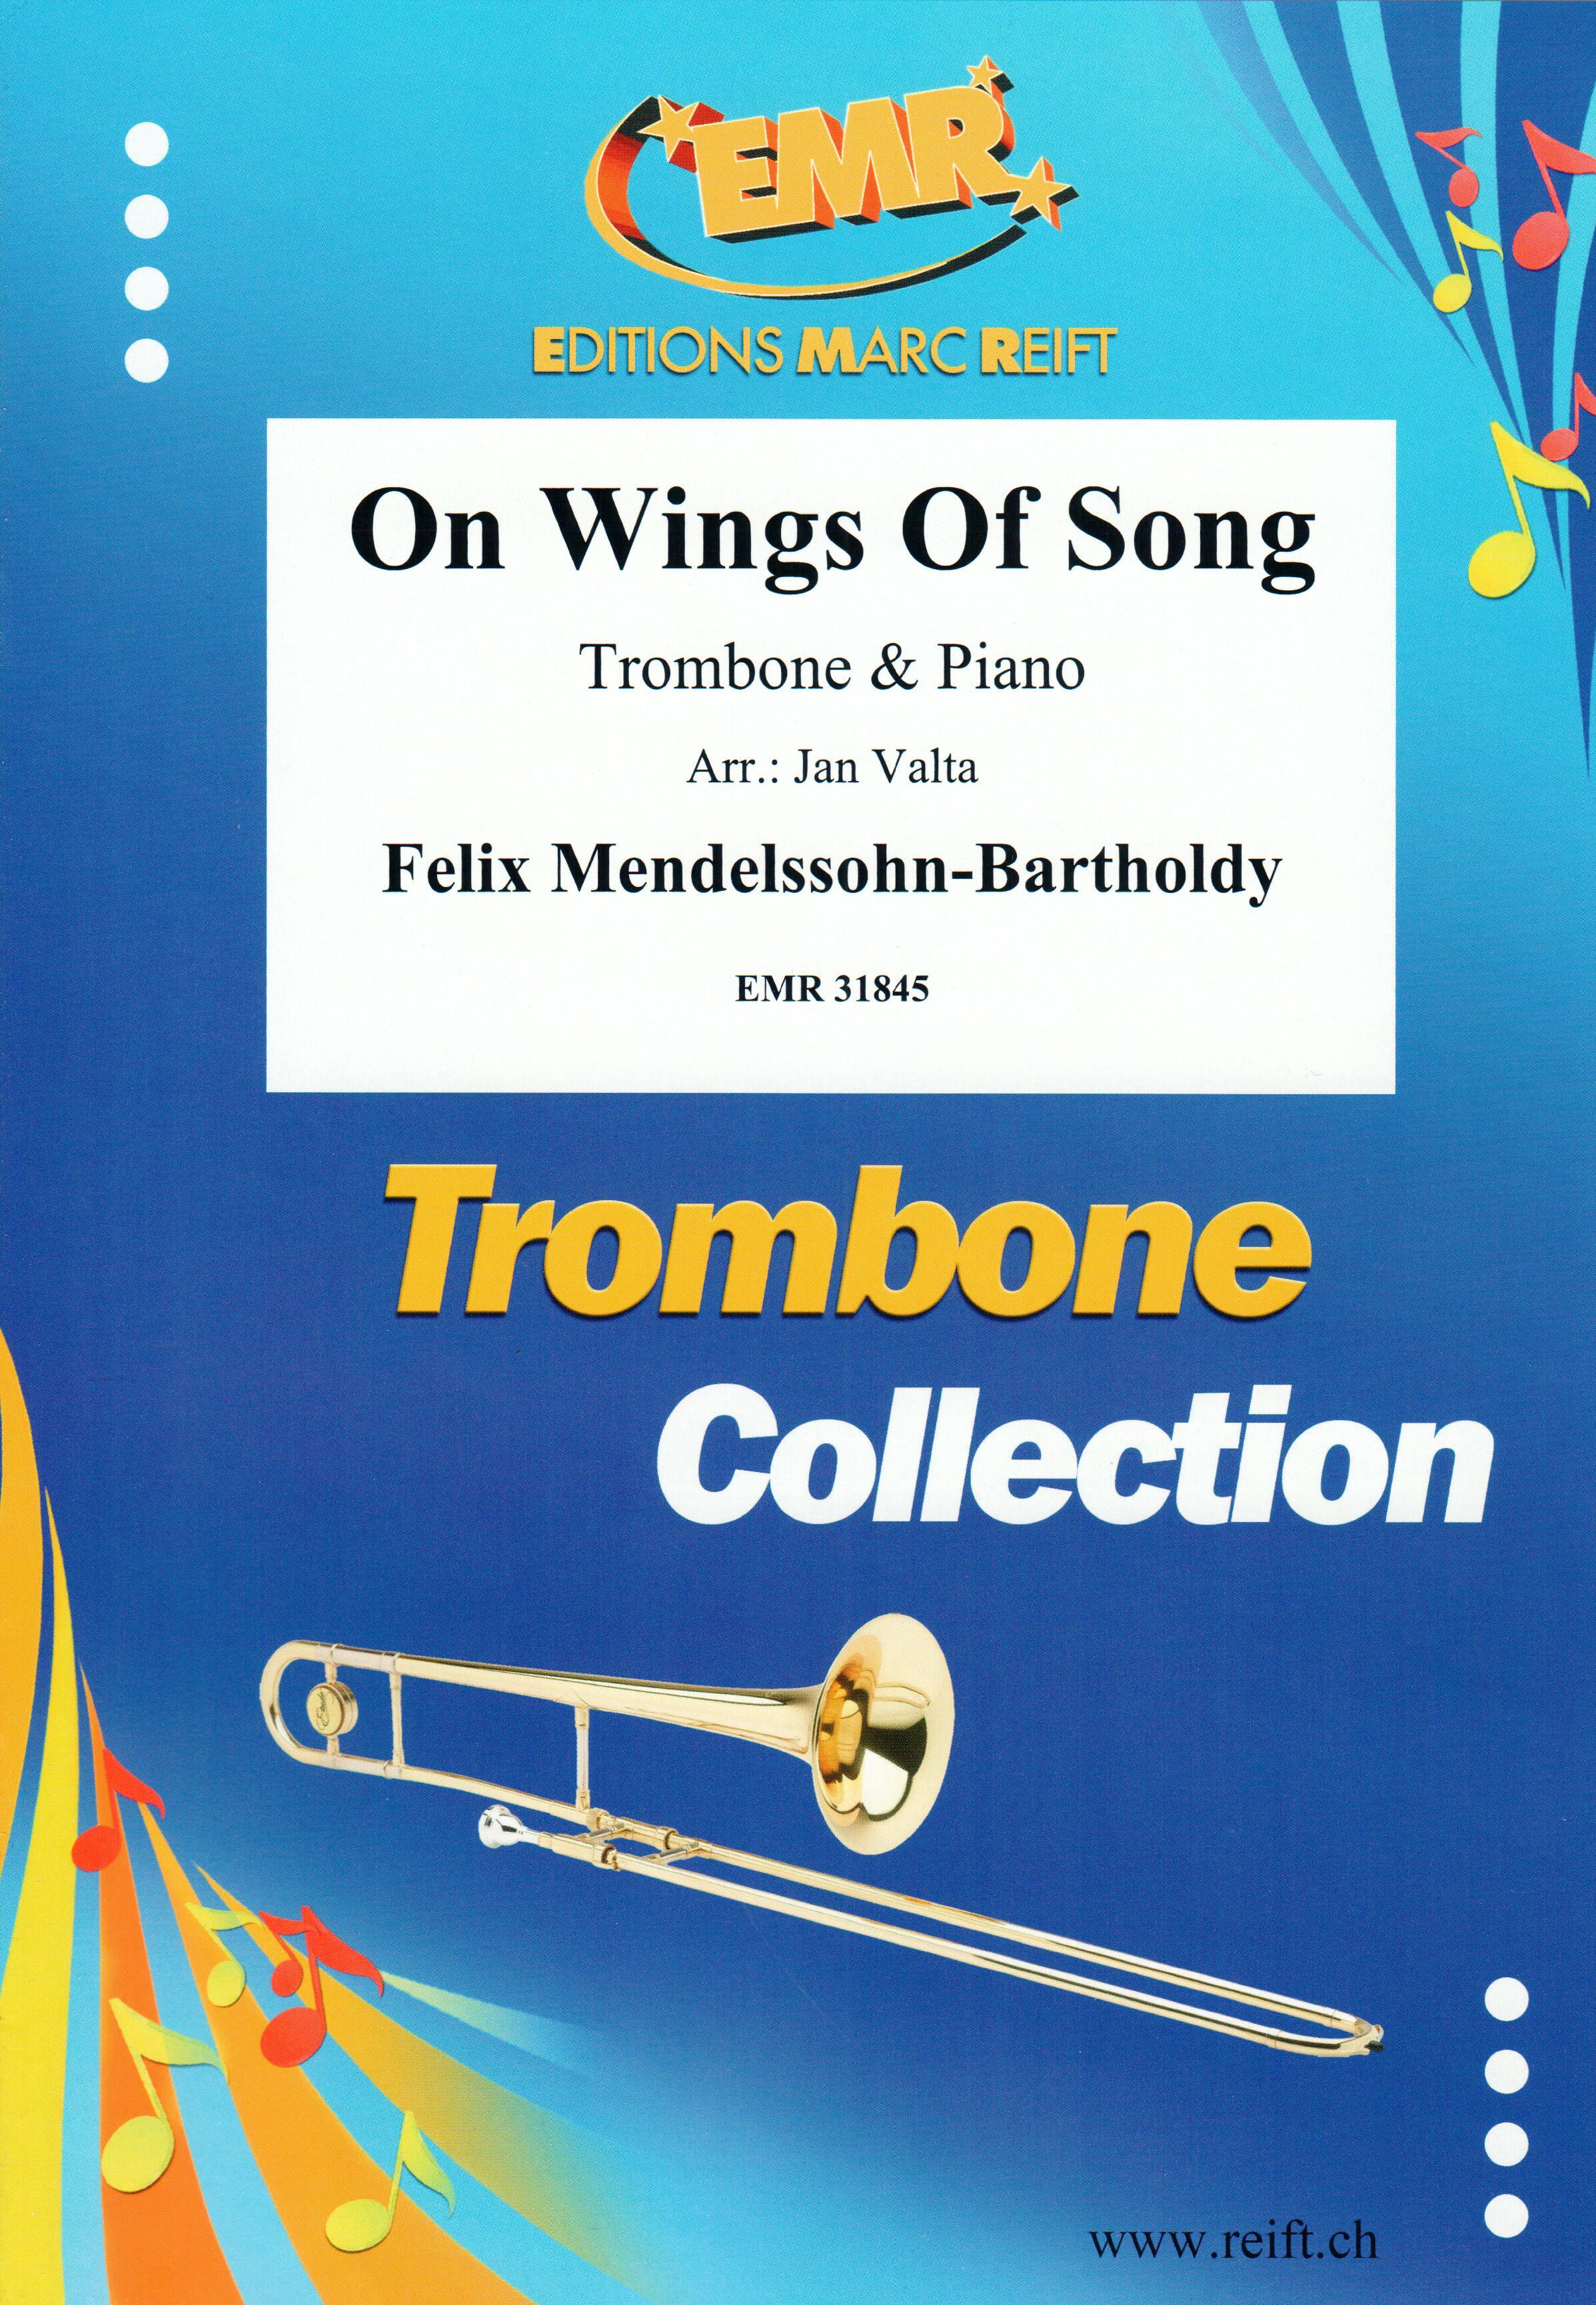 ON WINGS OF SONG, SOLOS - Trombone